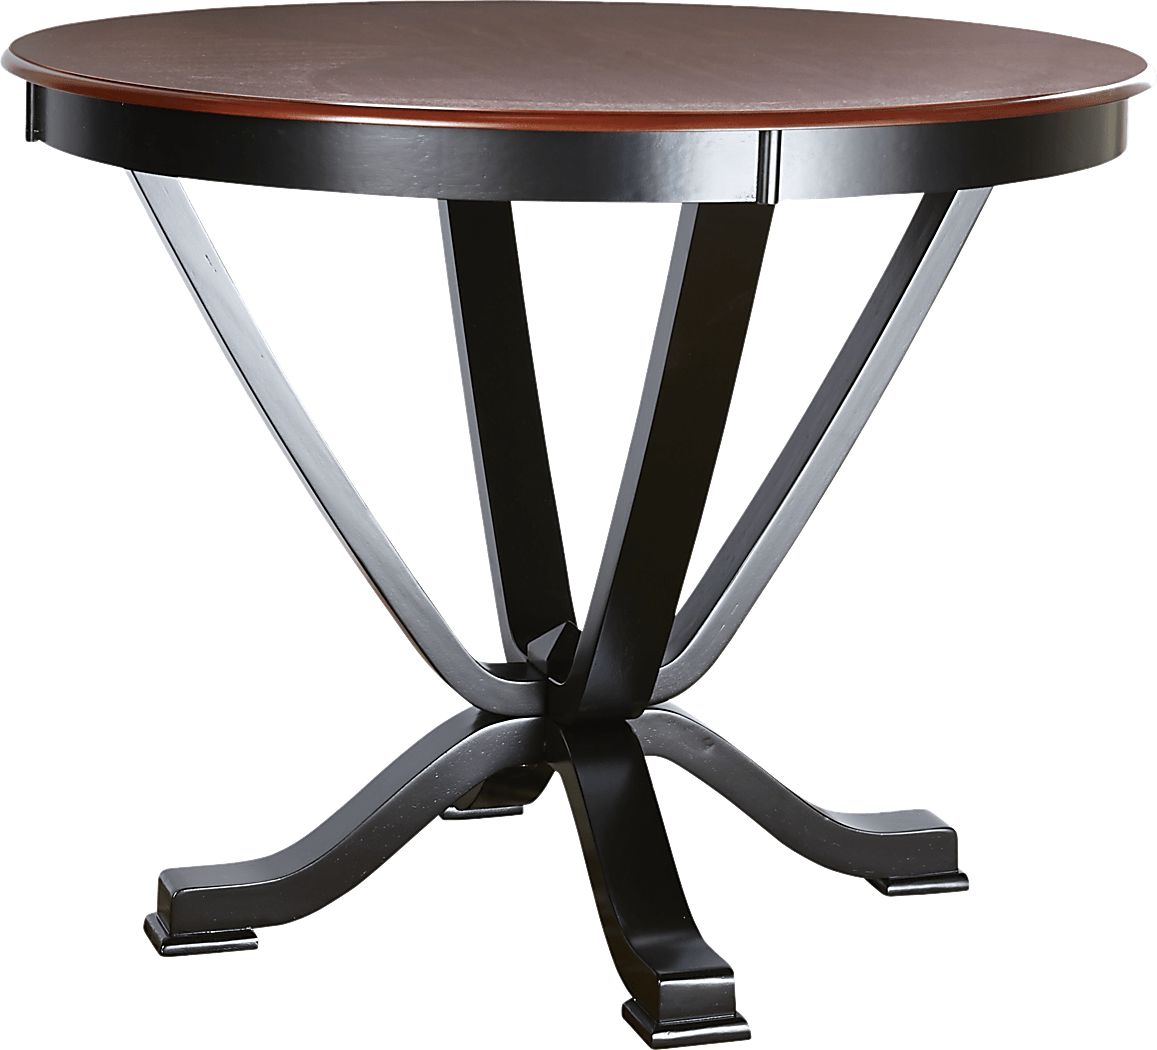  counter height round Dining Table